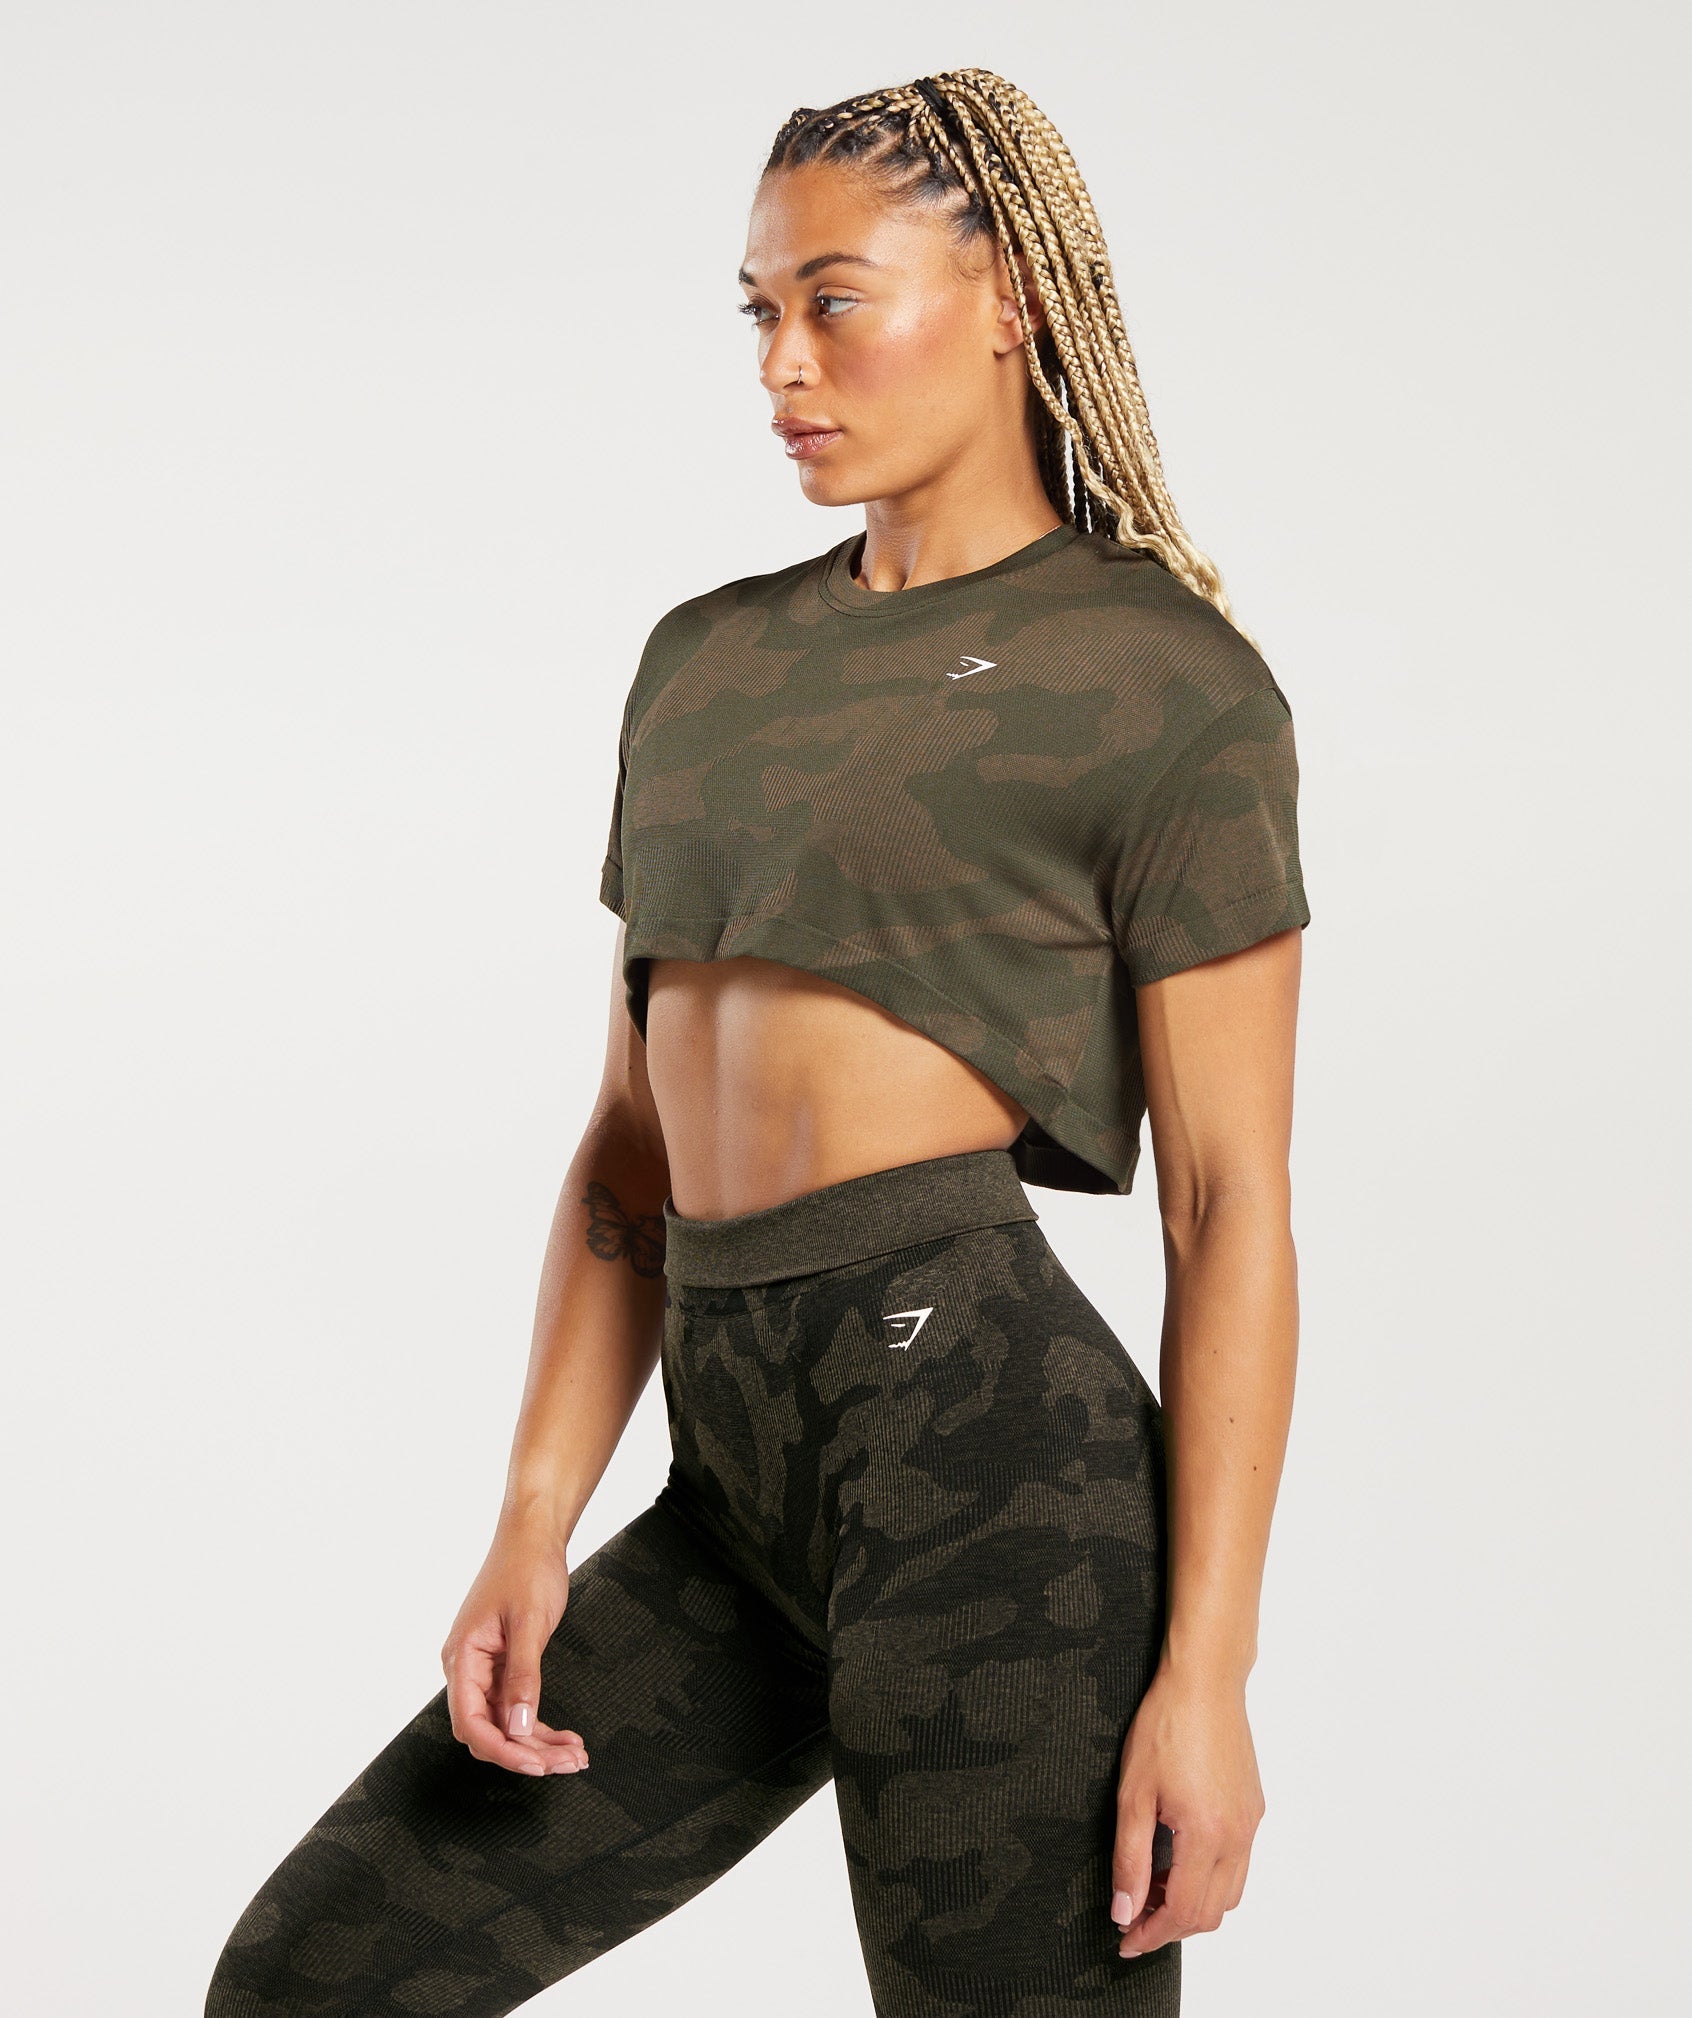 BRAND NEW GYMSHARK LAUNCHES, APEX & ADAPT CAMO